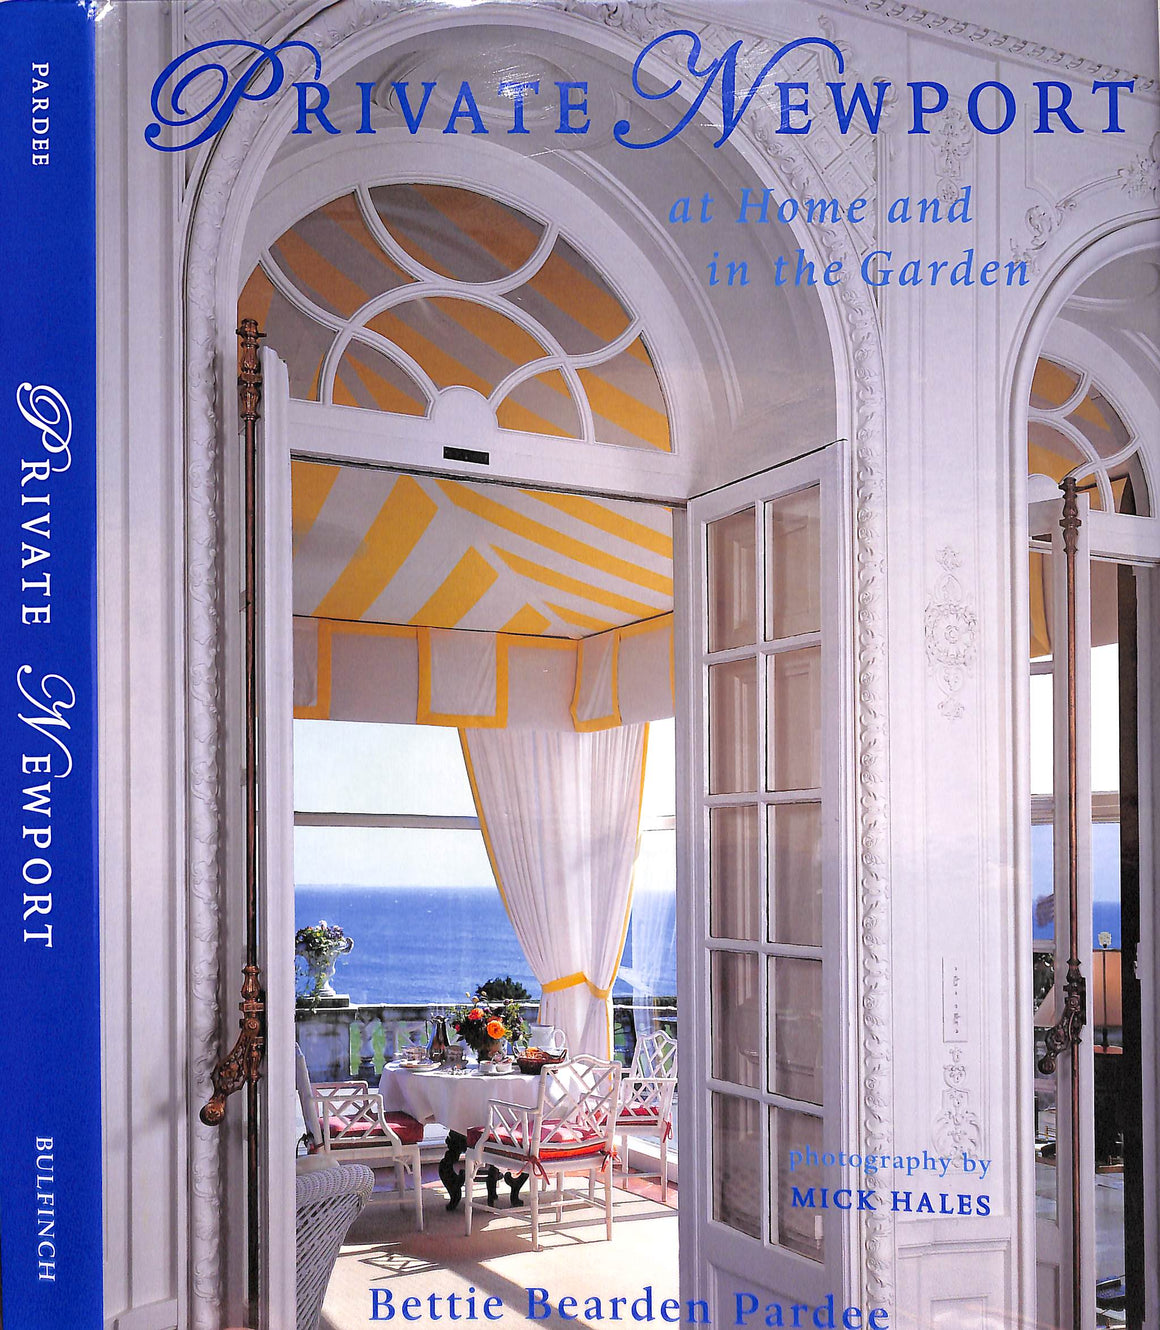 "Private Newport: At Home And In The Garden" 2004 PARDEE, Bettie Bearden